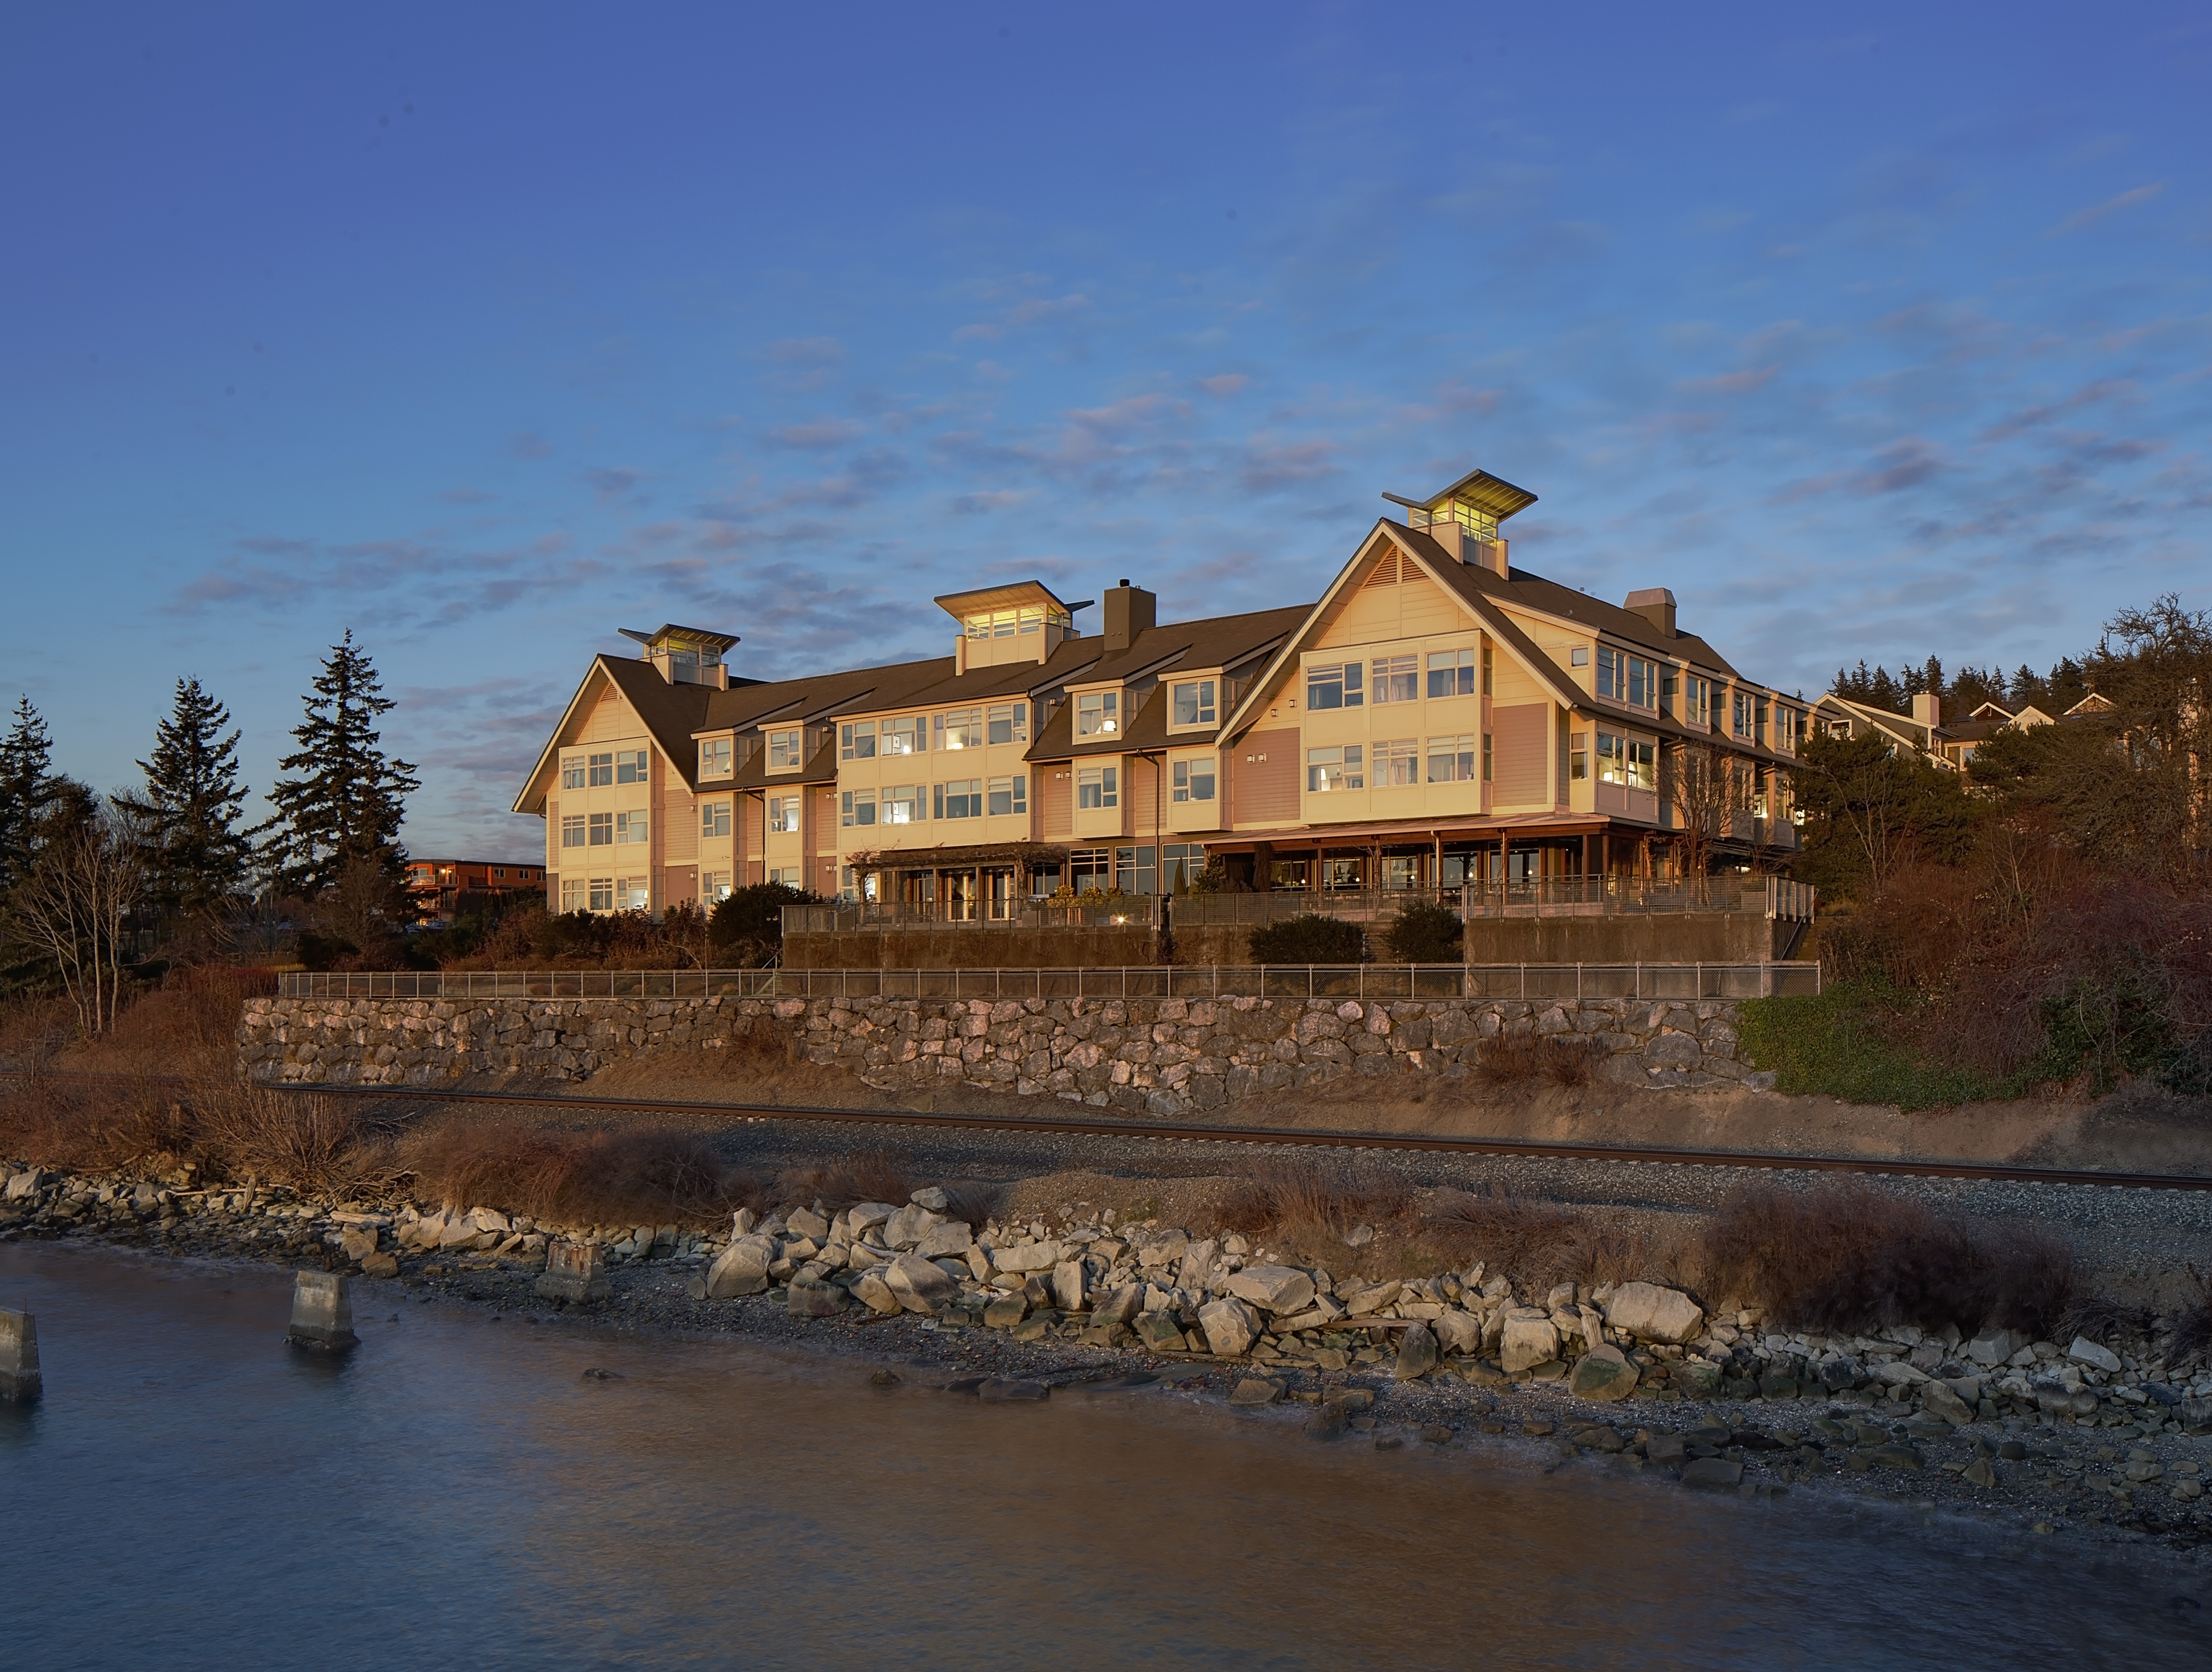 Rustic Hotel Chrysalis on the shore of Bellingham Bay with railroad tracks running below.